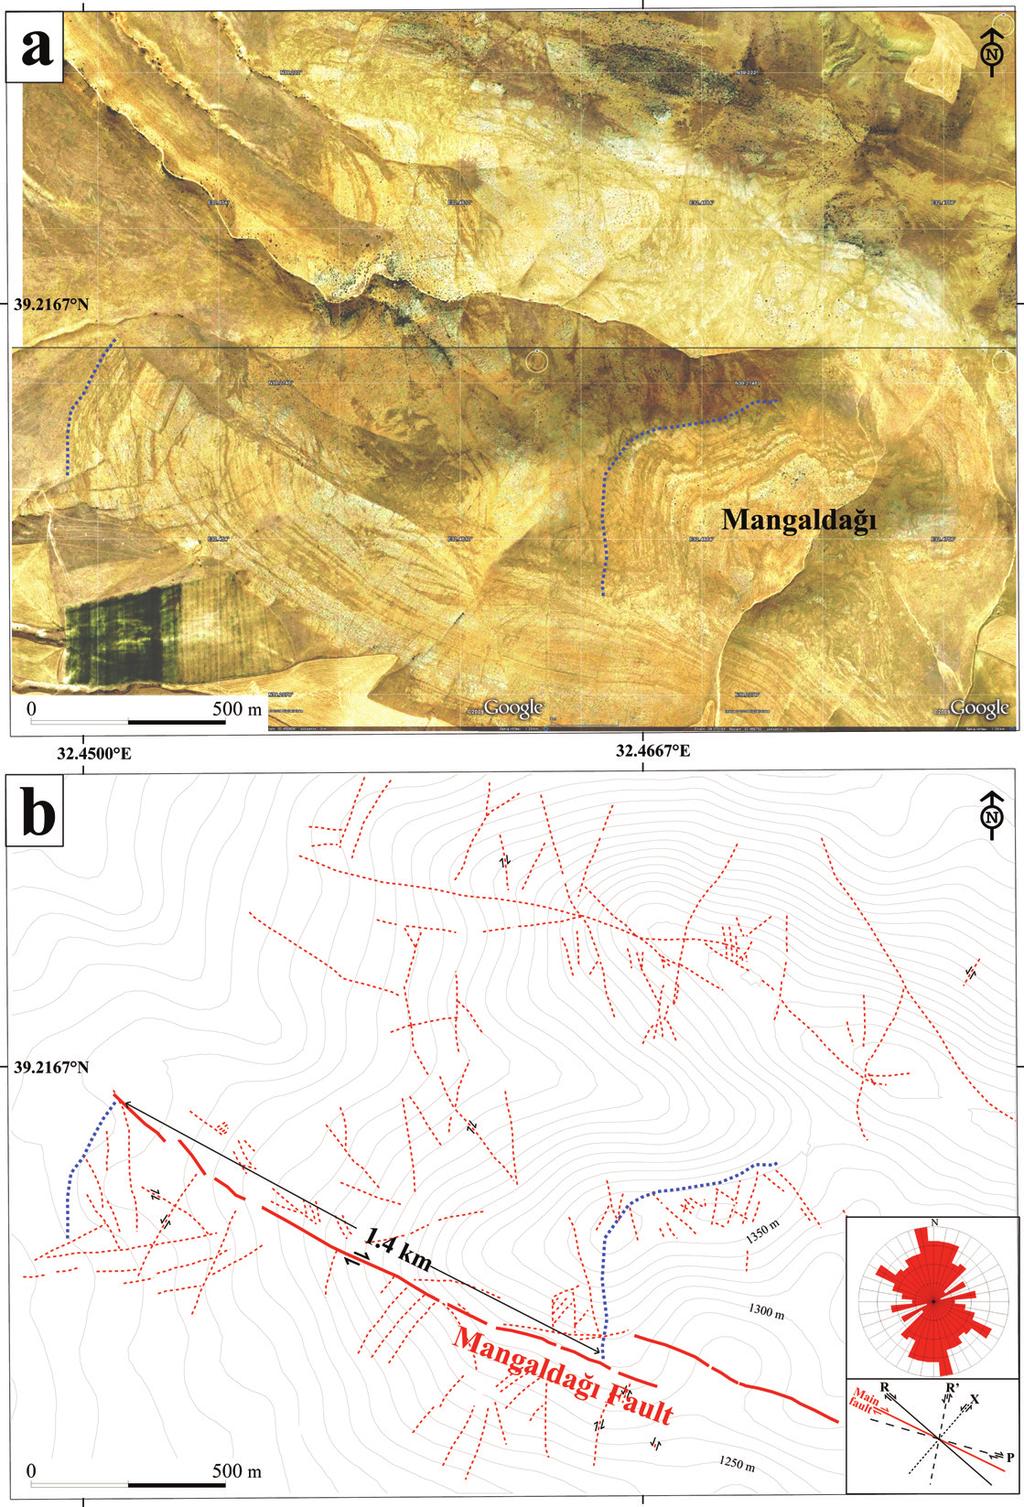 Bull. Min. Res. Exp. (2016) 152:25-37 Figure 8- a) Satellite image related to the Mangaldağı fault.